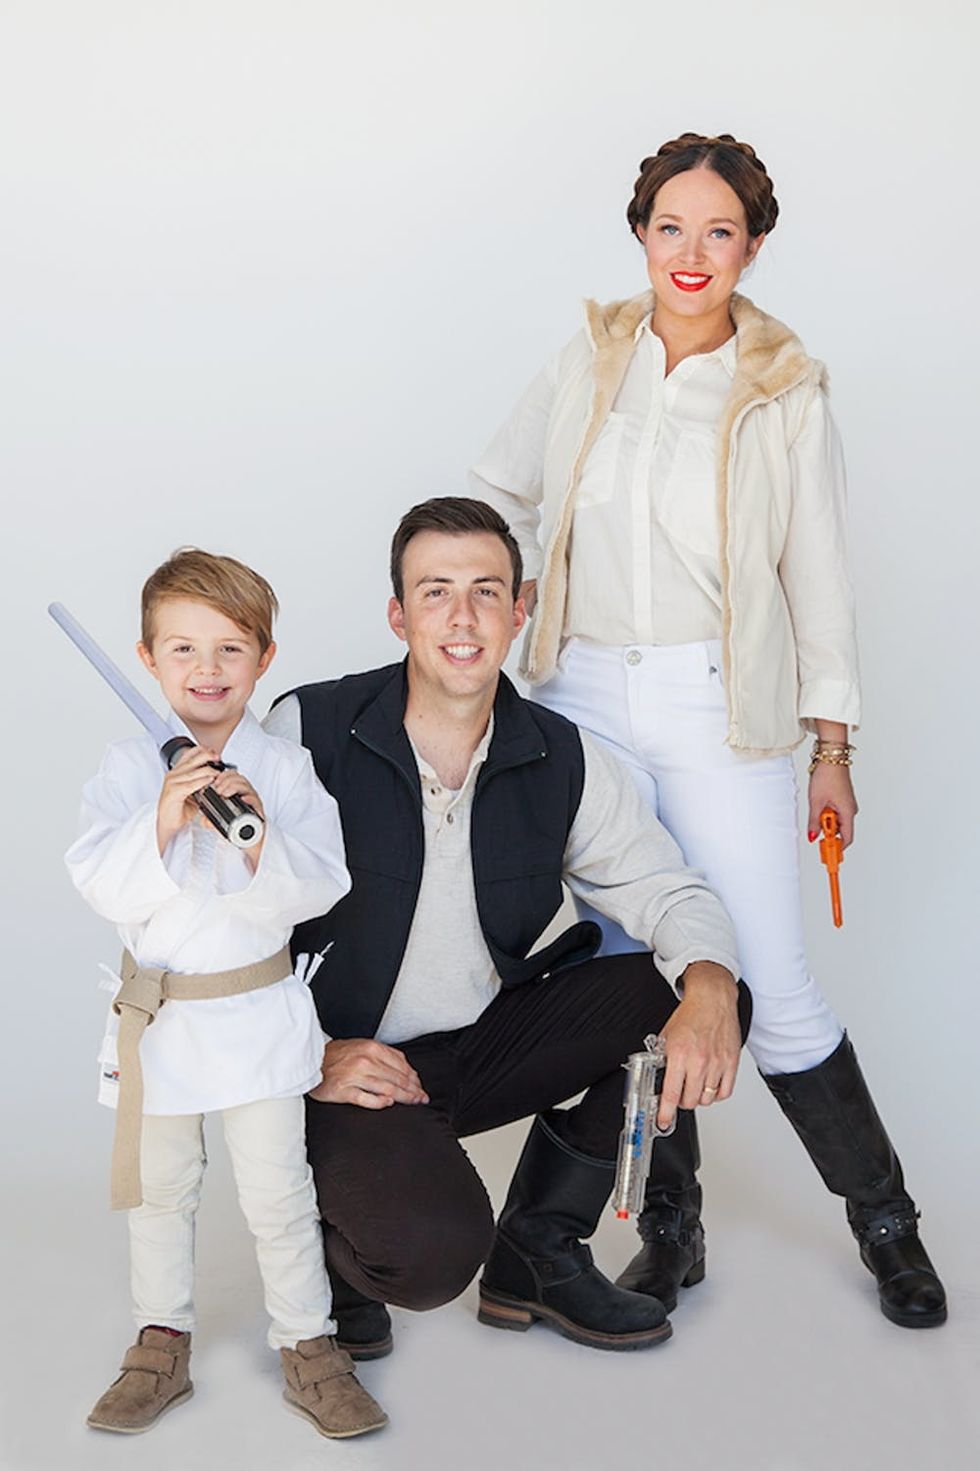 Star Wars Halloween Costume for Family of 3